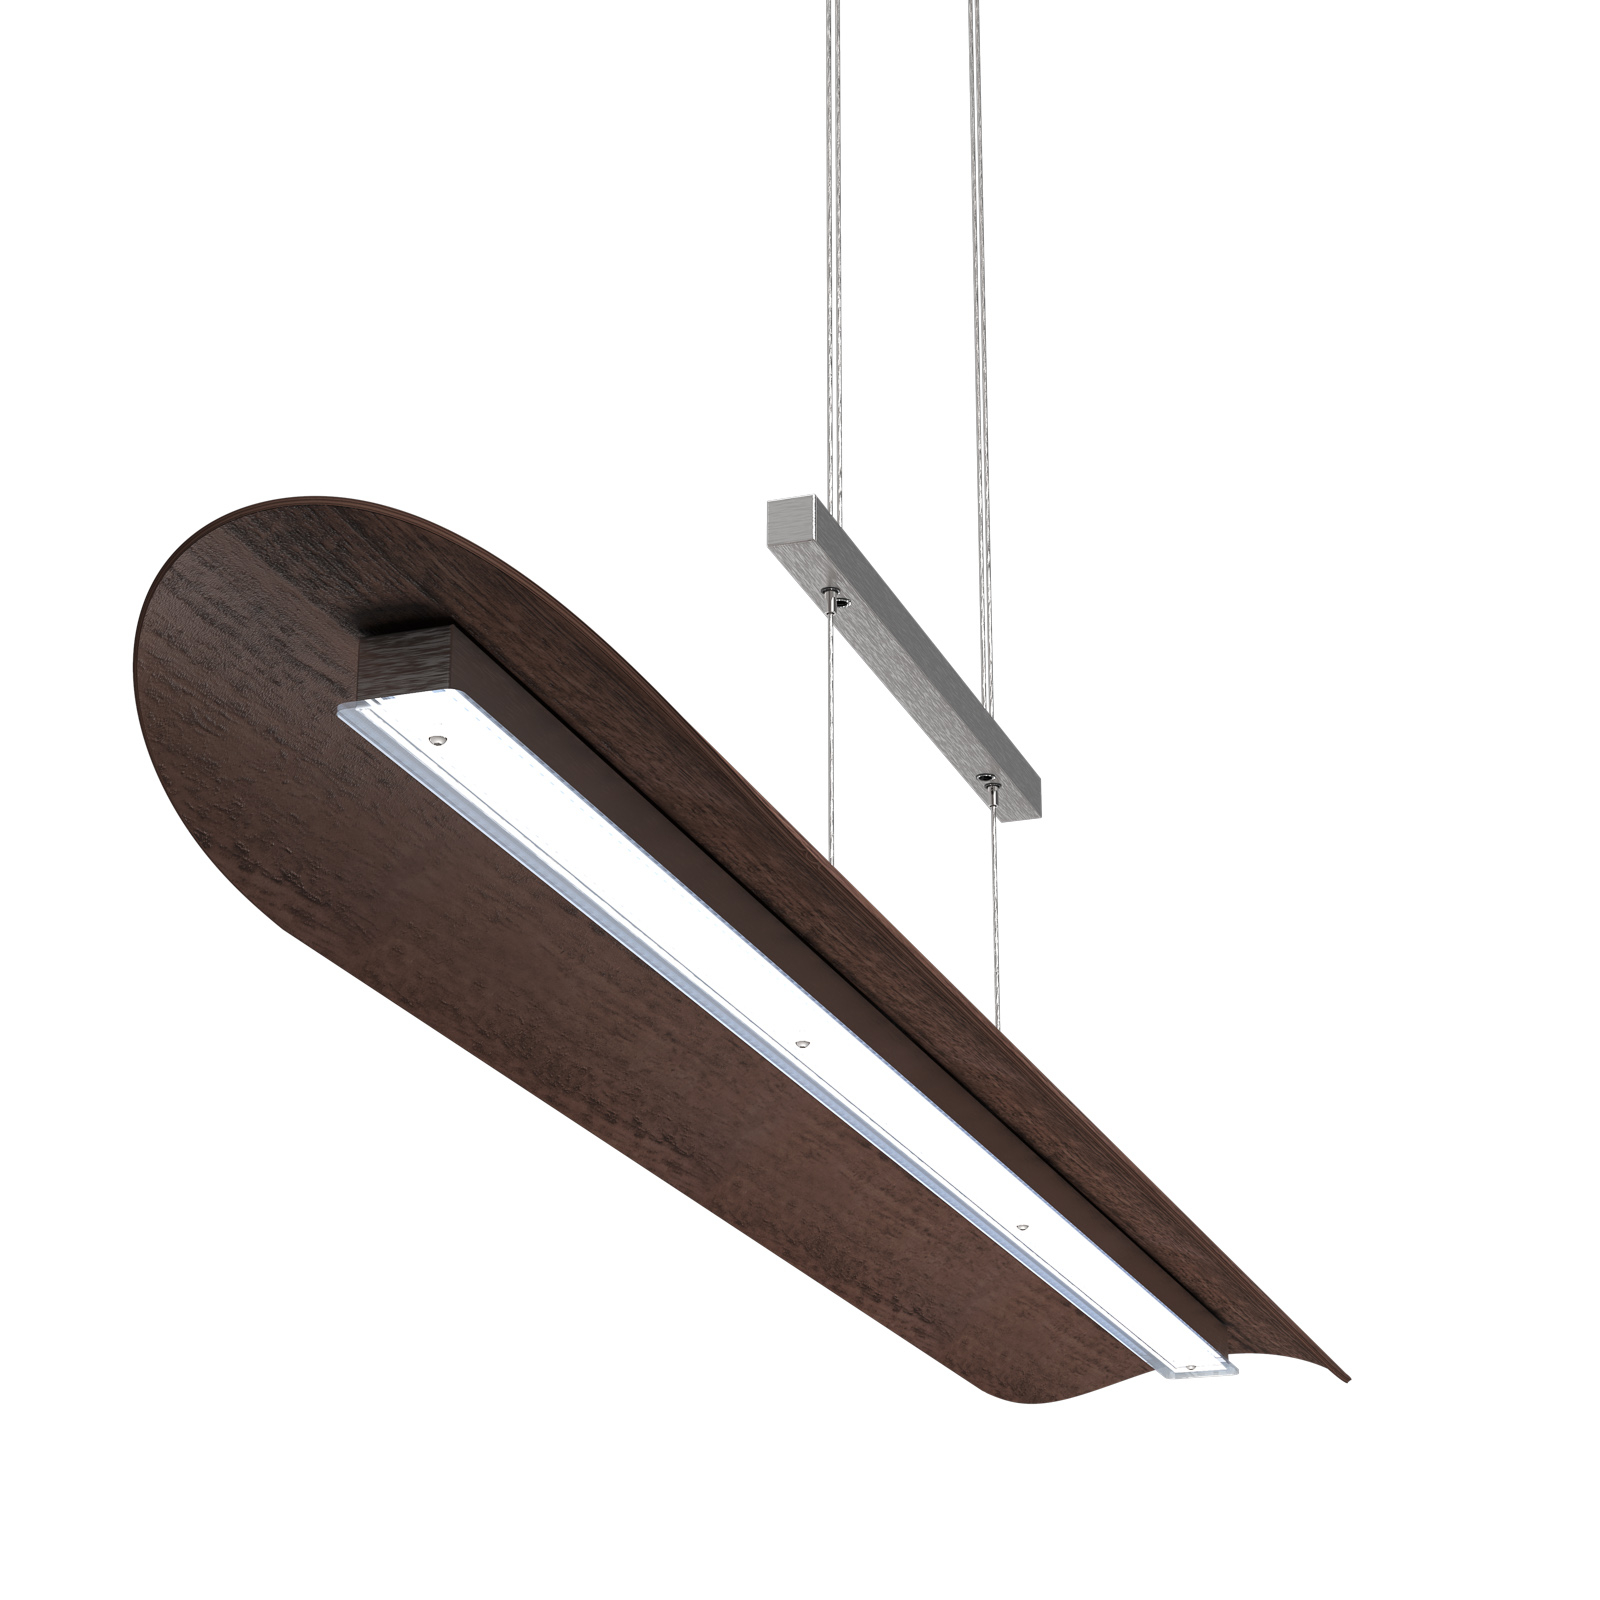 LED hanglamp Colombia XL, noten